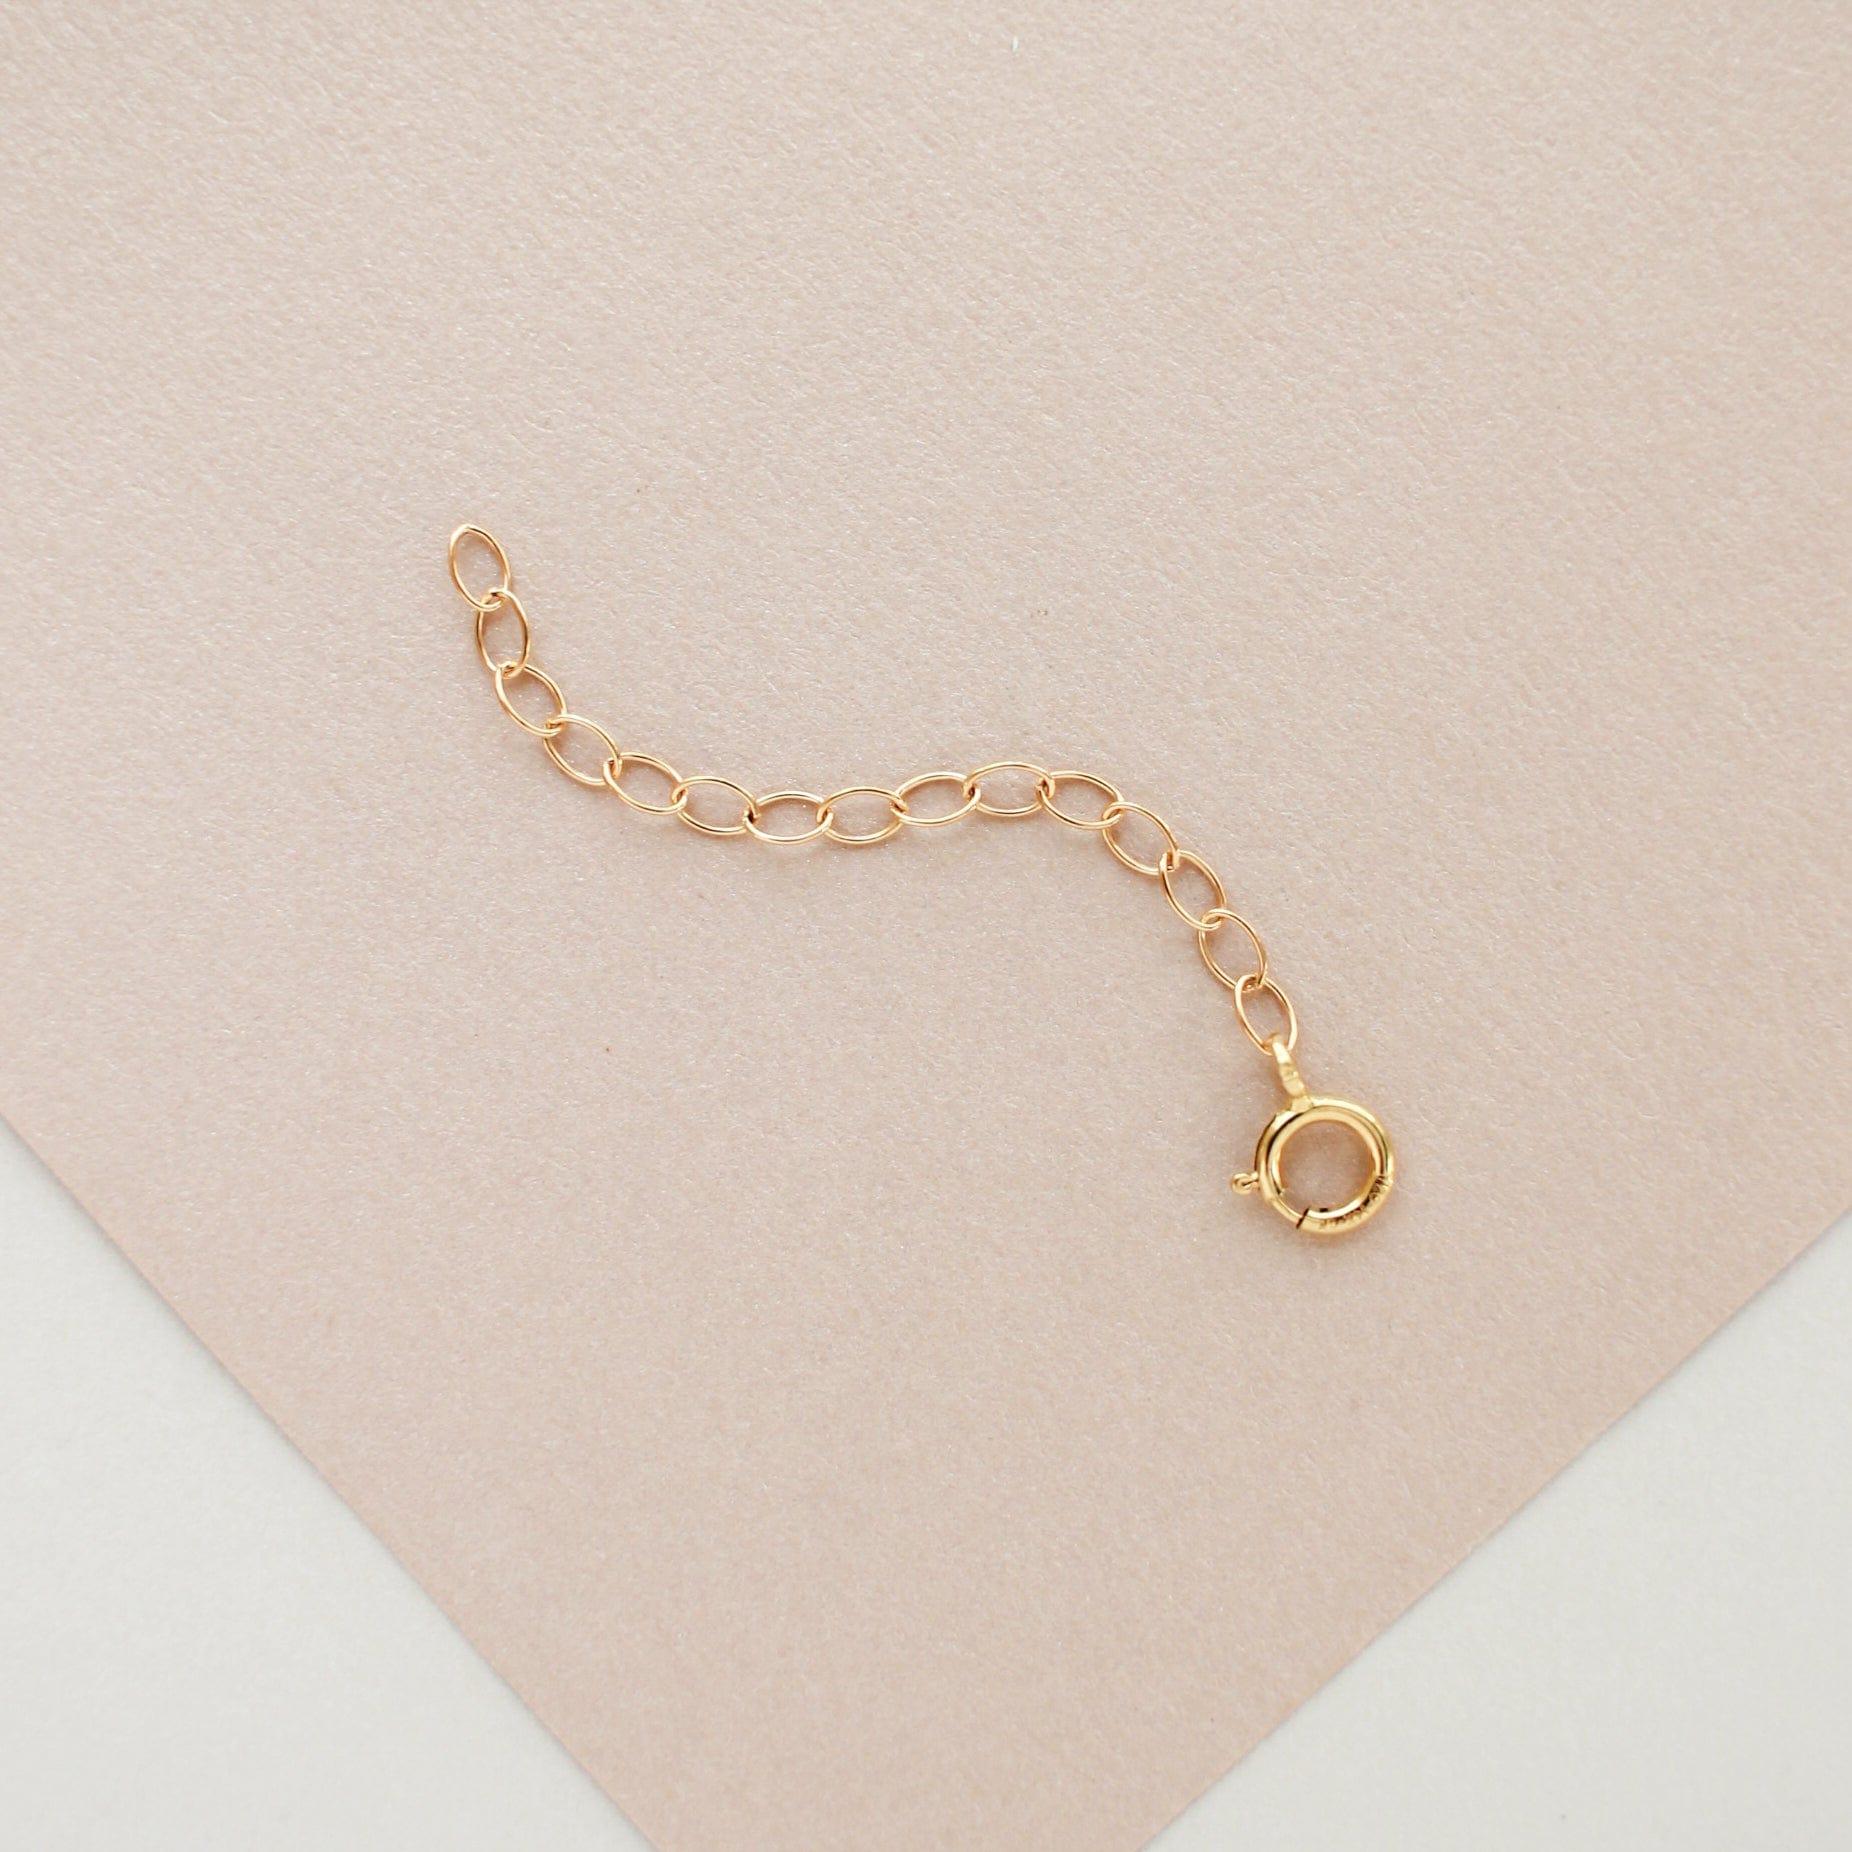 Detachable Chain Extender - Nolia Jewelry - Meaningful + Sustainably Handcrafted Jewelry